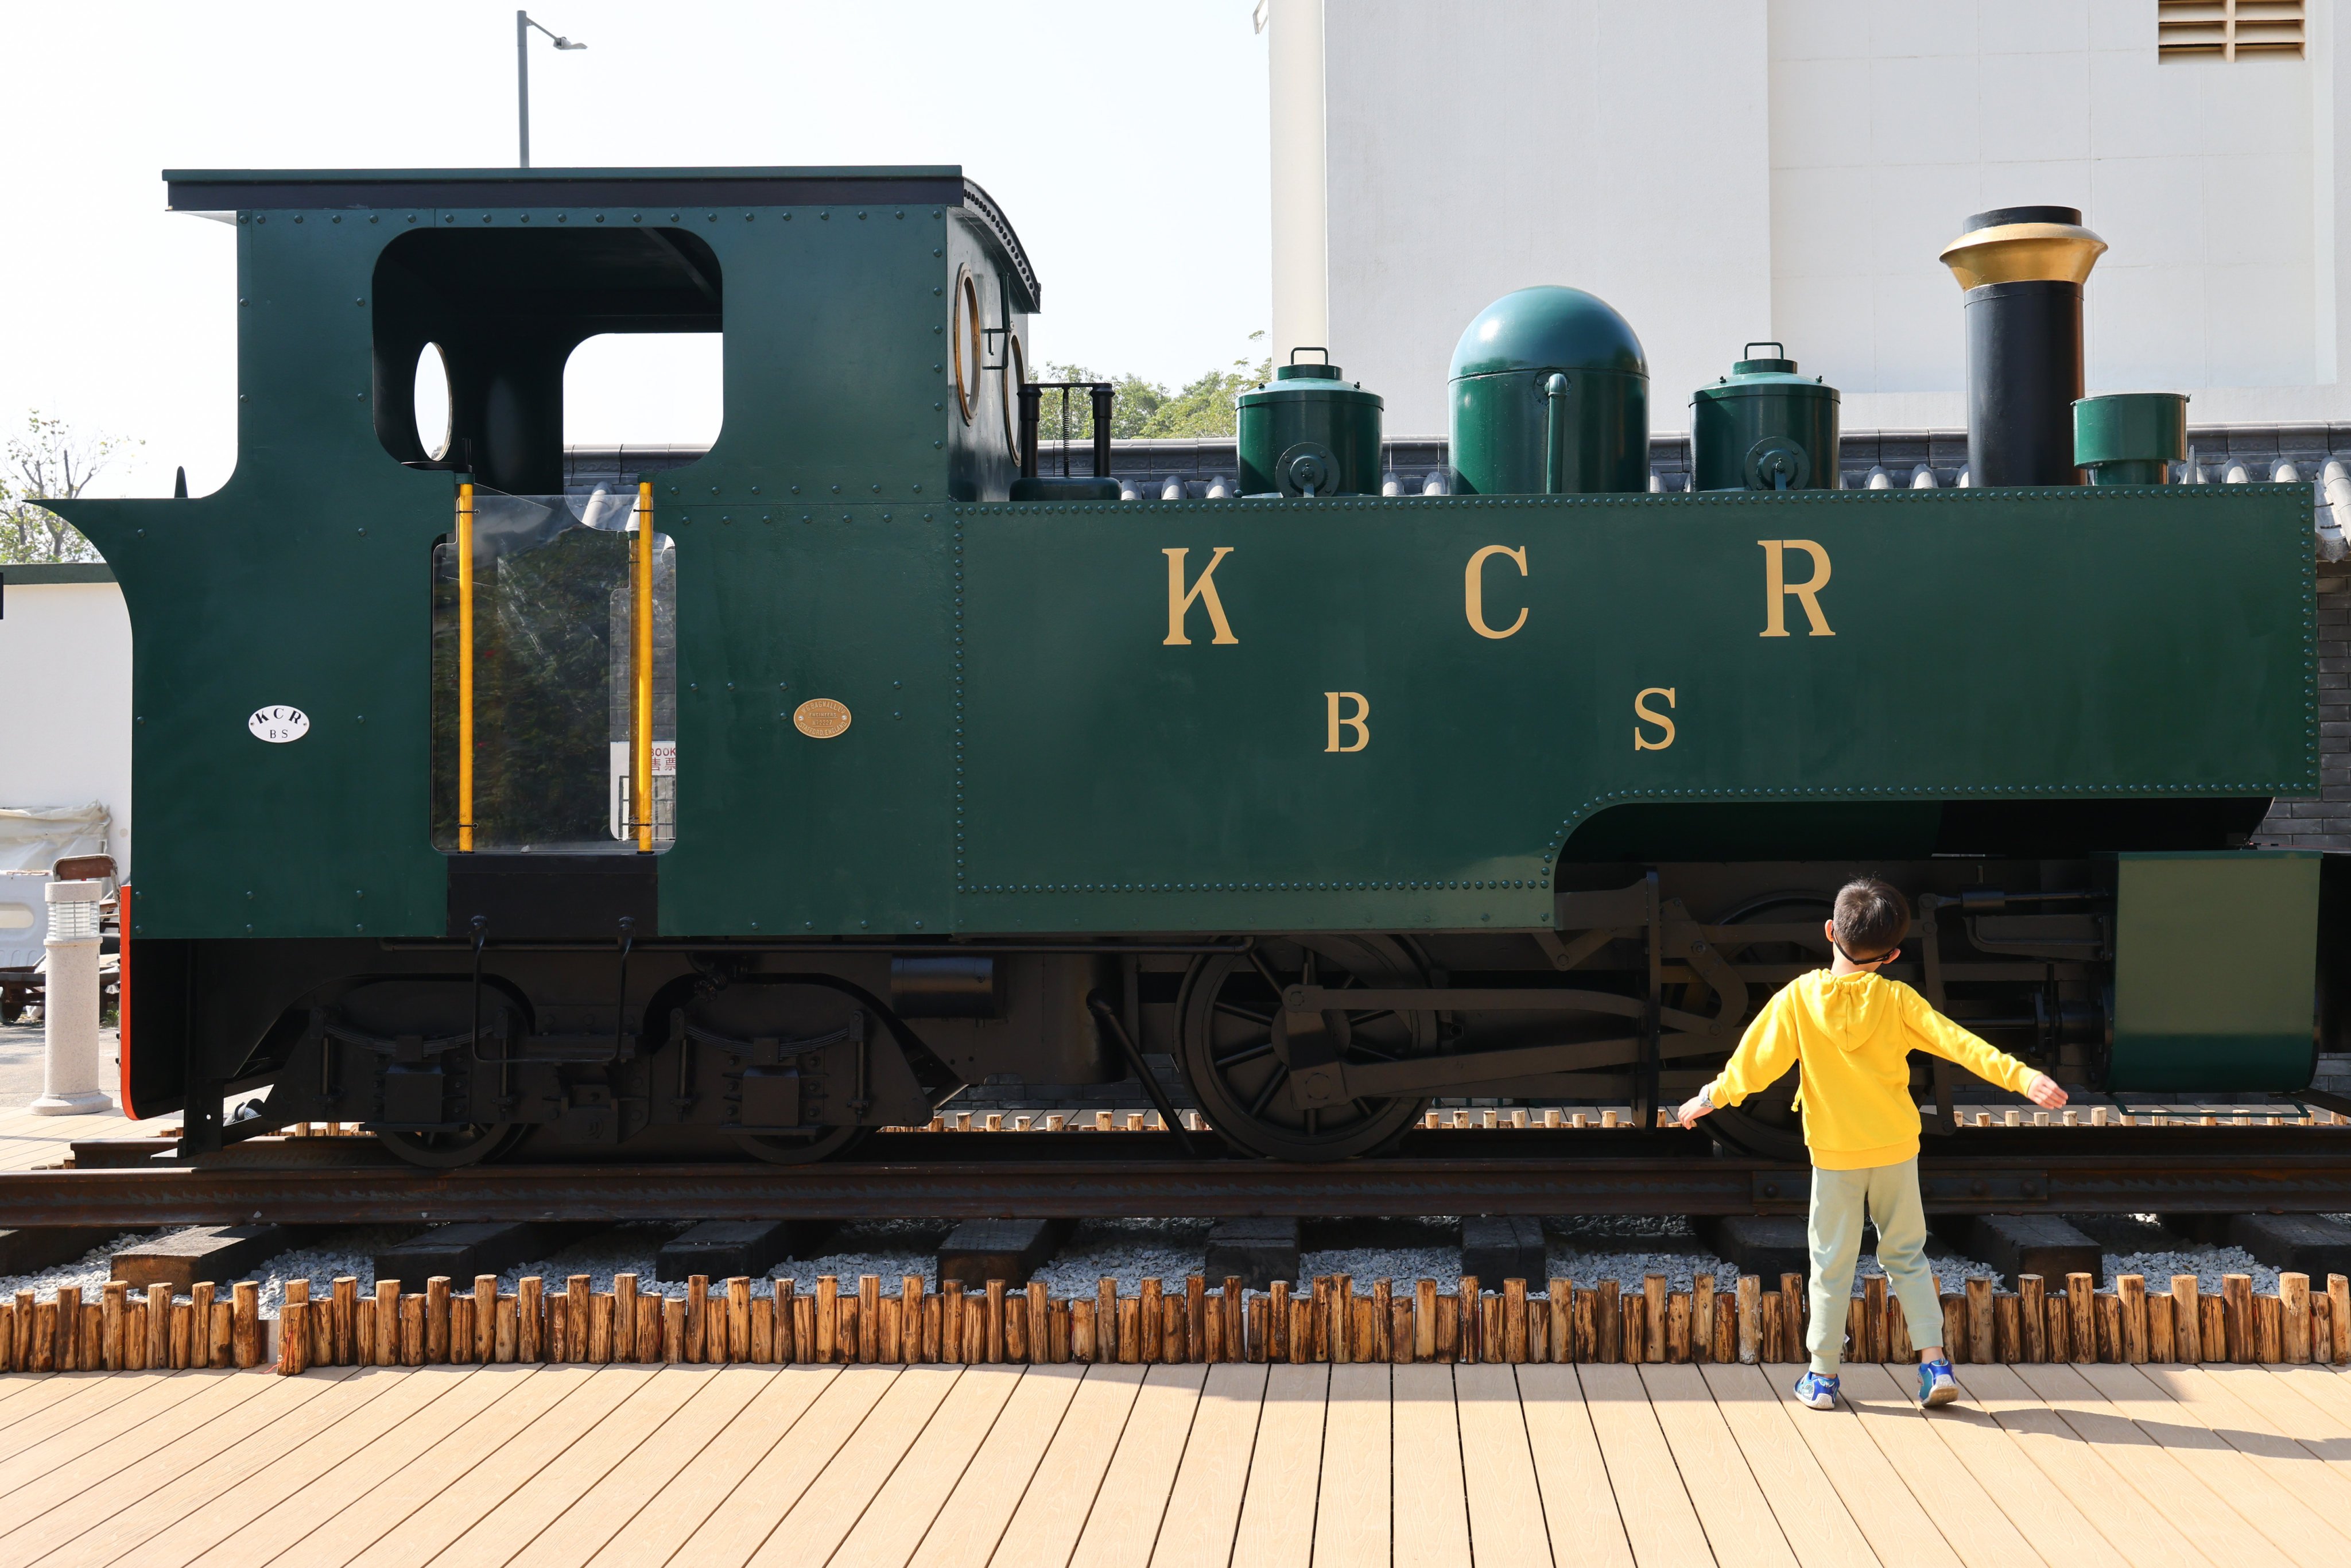 A full-size replica of an old Kowloon-Canton Railway steam engine, one of the attractions at time capsule border town Sha Tau Kok, attracts a young admirer. Photo: Dickson Lee